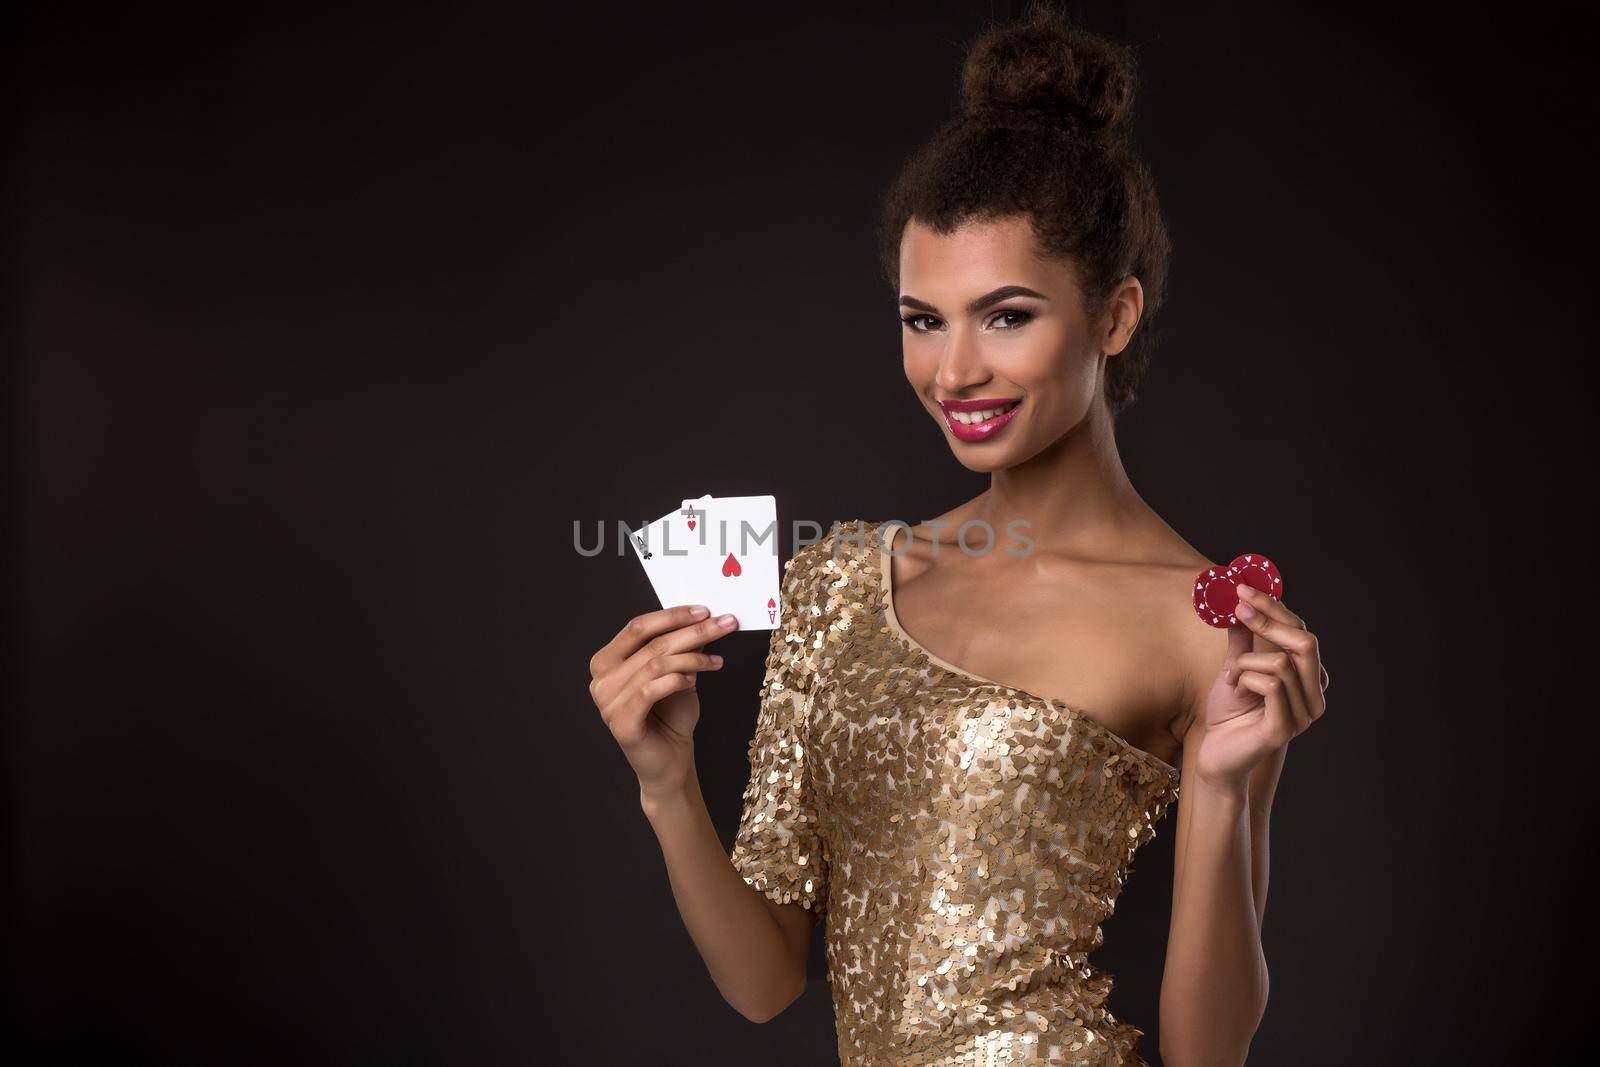 Woman winning - Young woman in a classy gold dress holding two aces and two red chips, a poker of aces card combination. Studio shot on black background